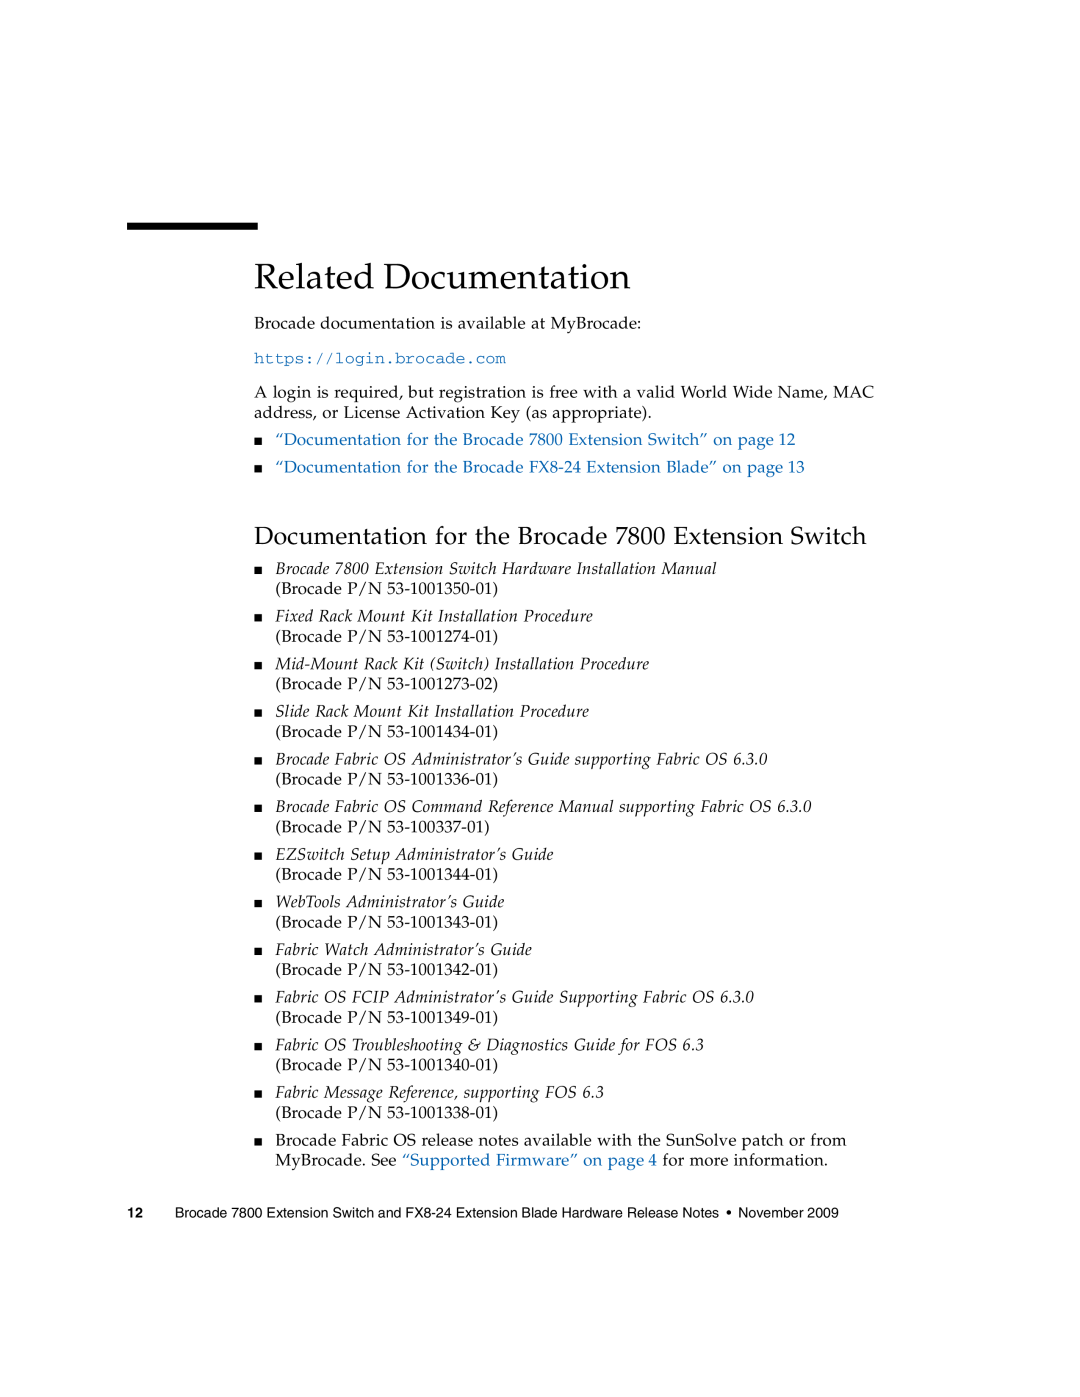 Sun Microsystems Related Documentation, Documentation for the Brocade 7800 Extension Switch, https//login.brocade.com 